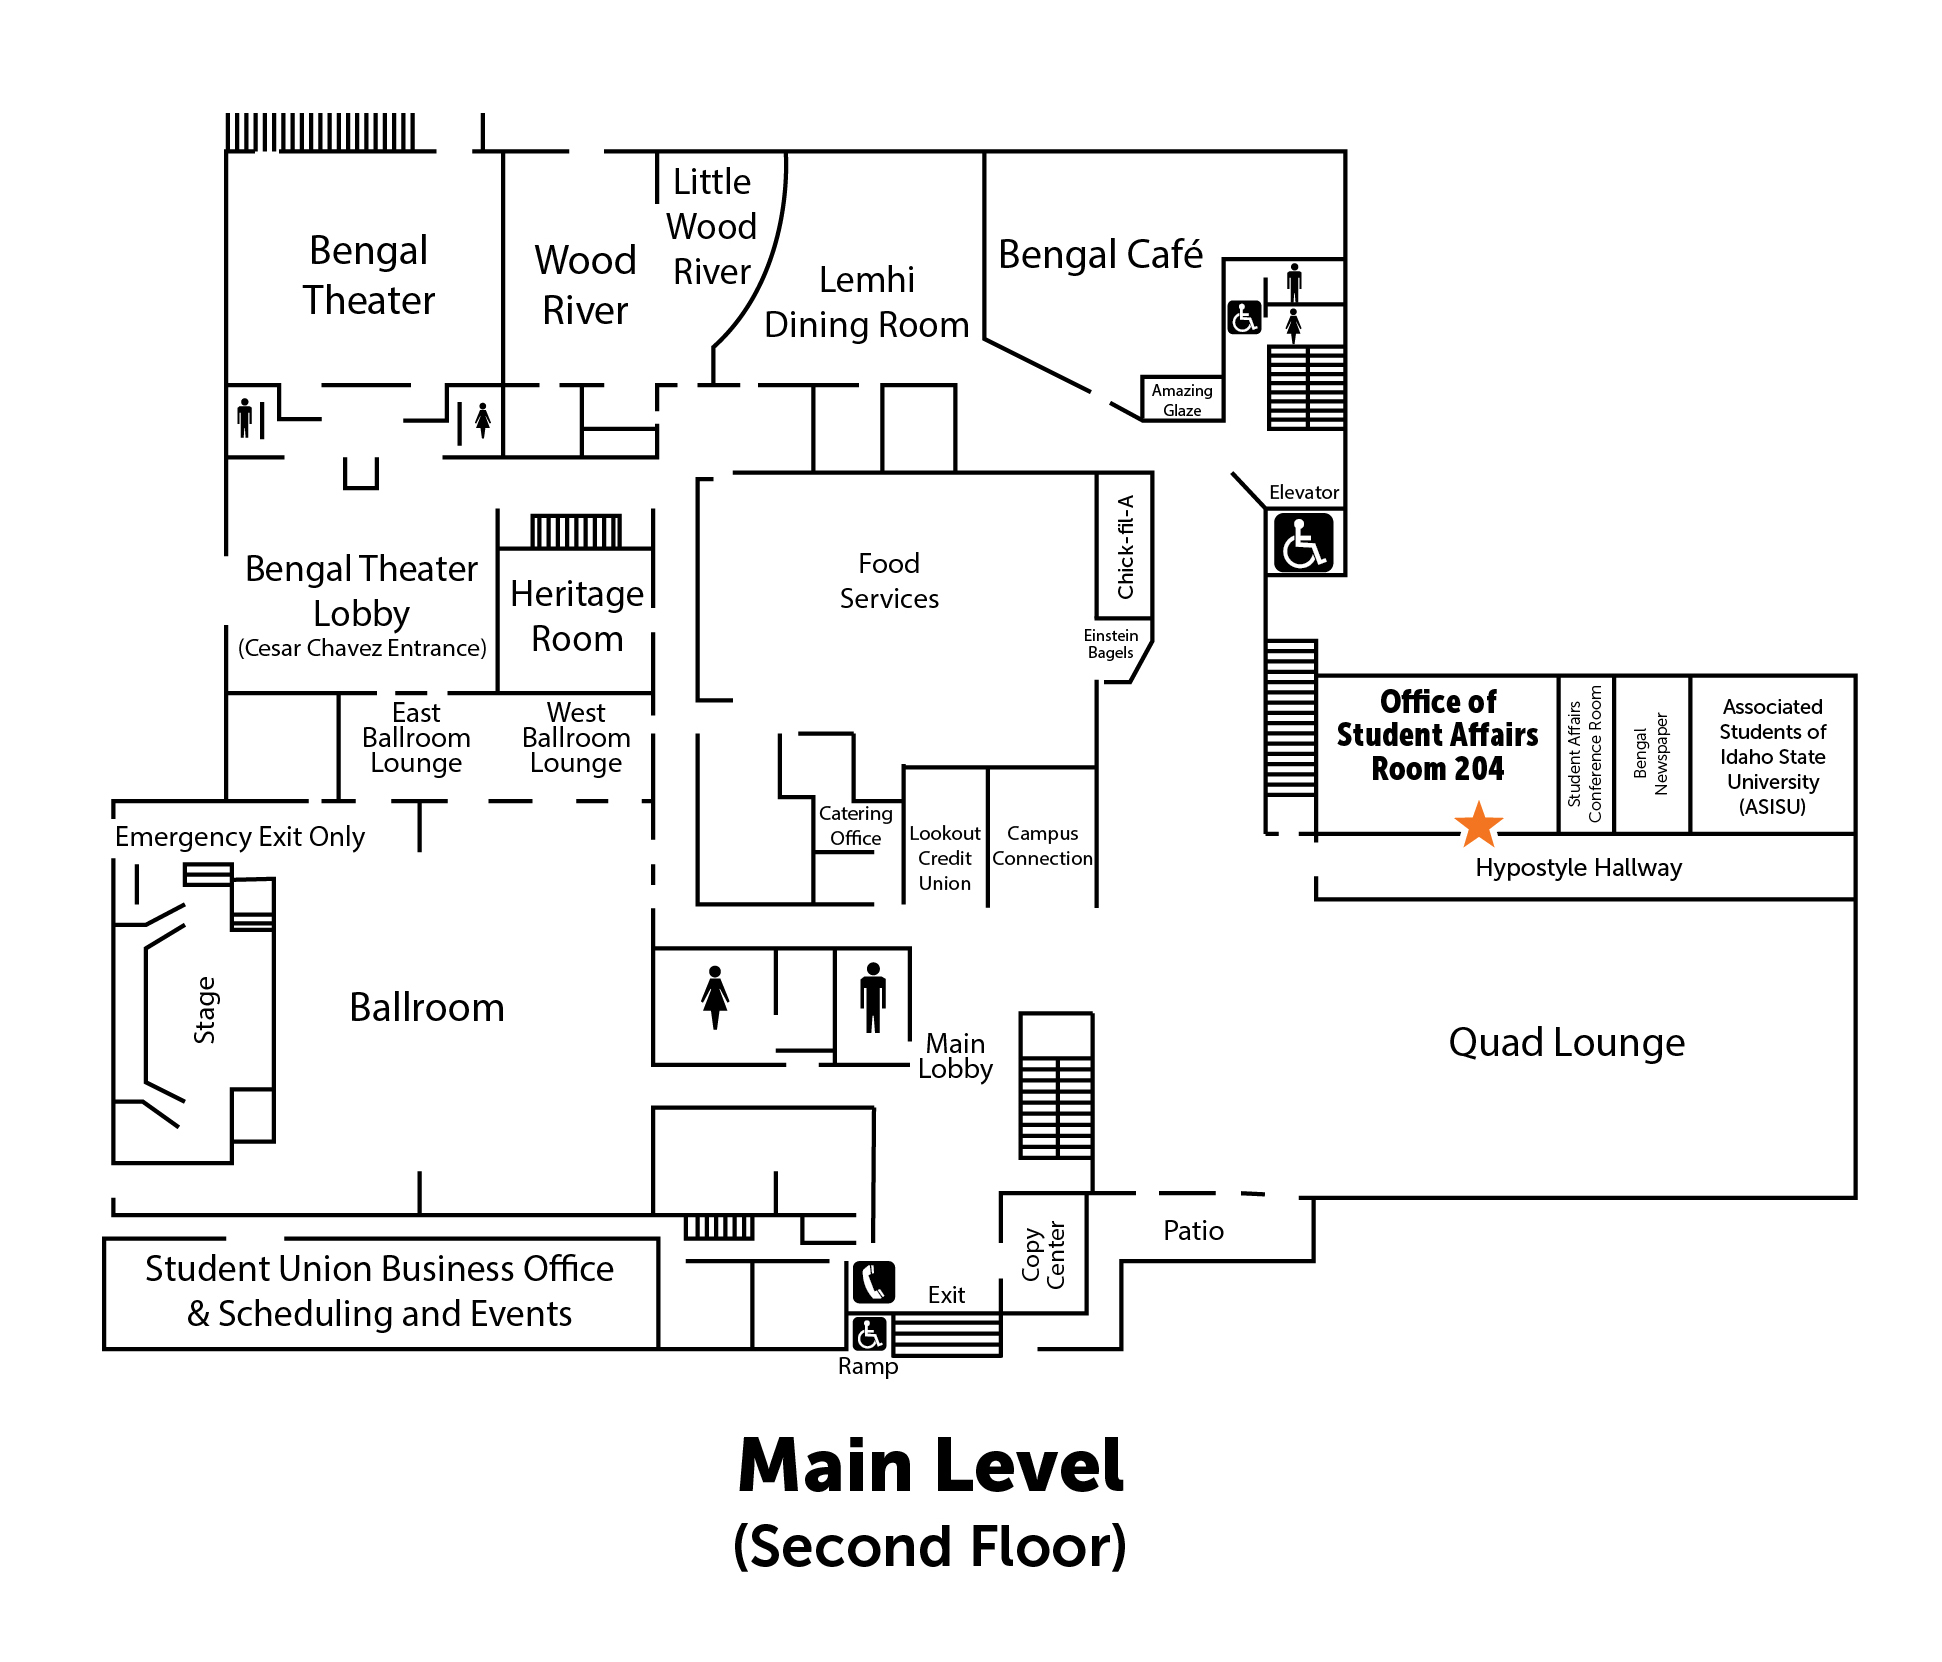 A Map of the Student Union Building